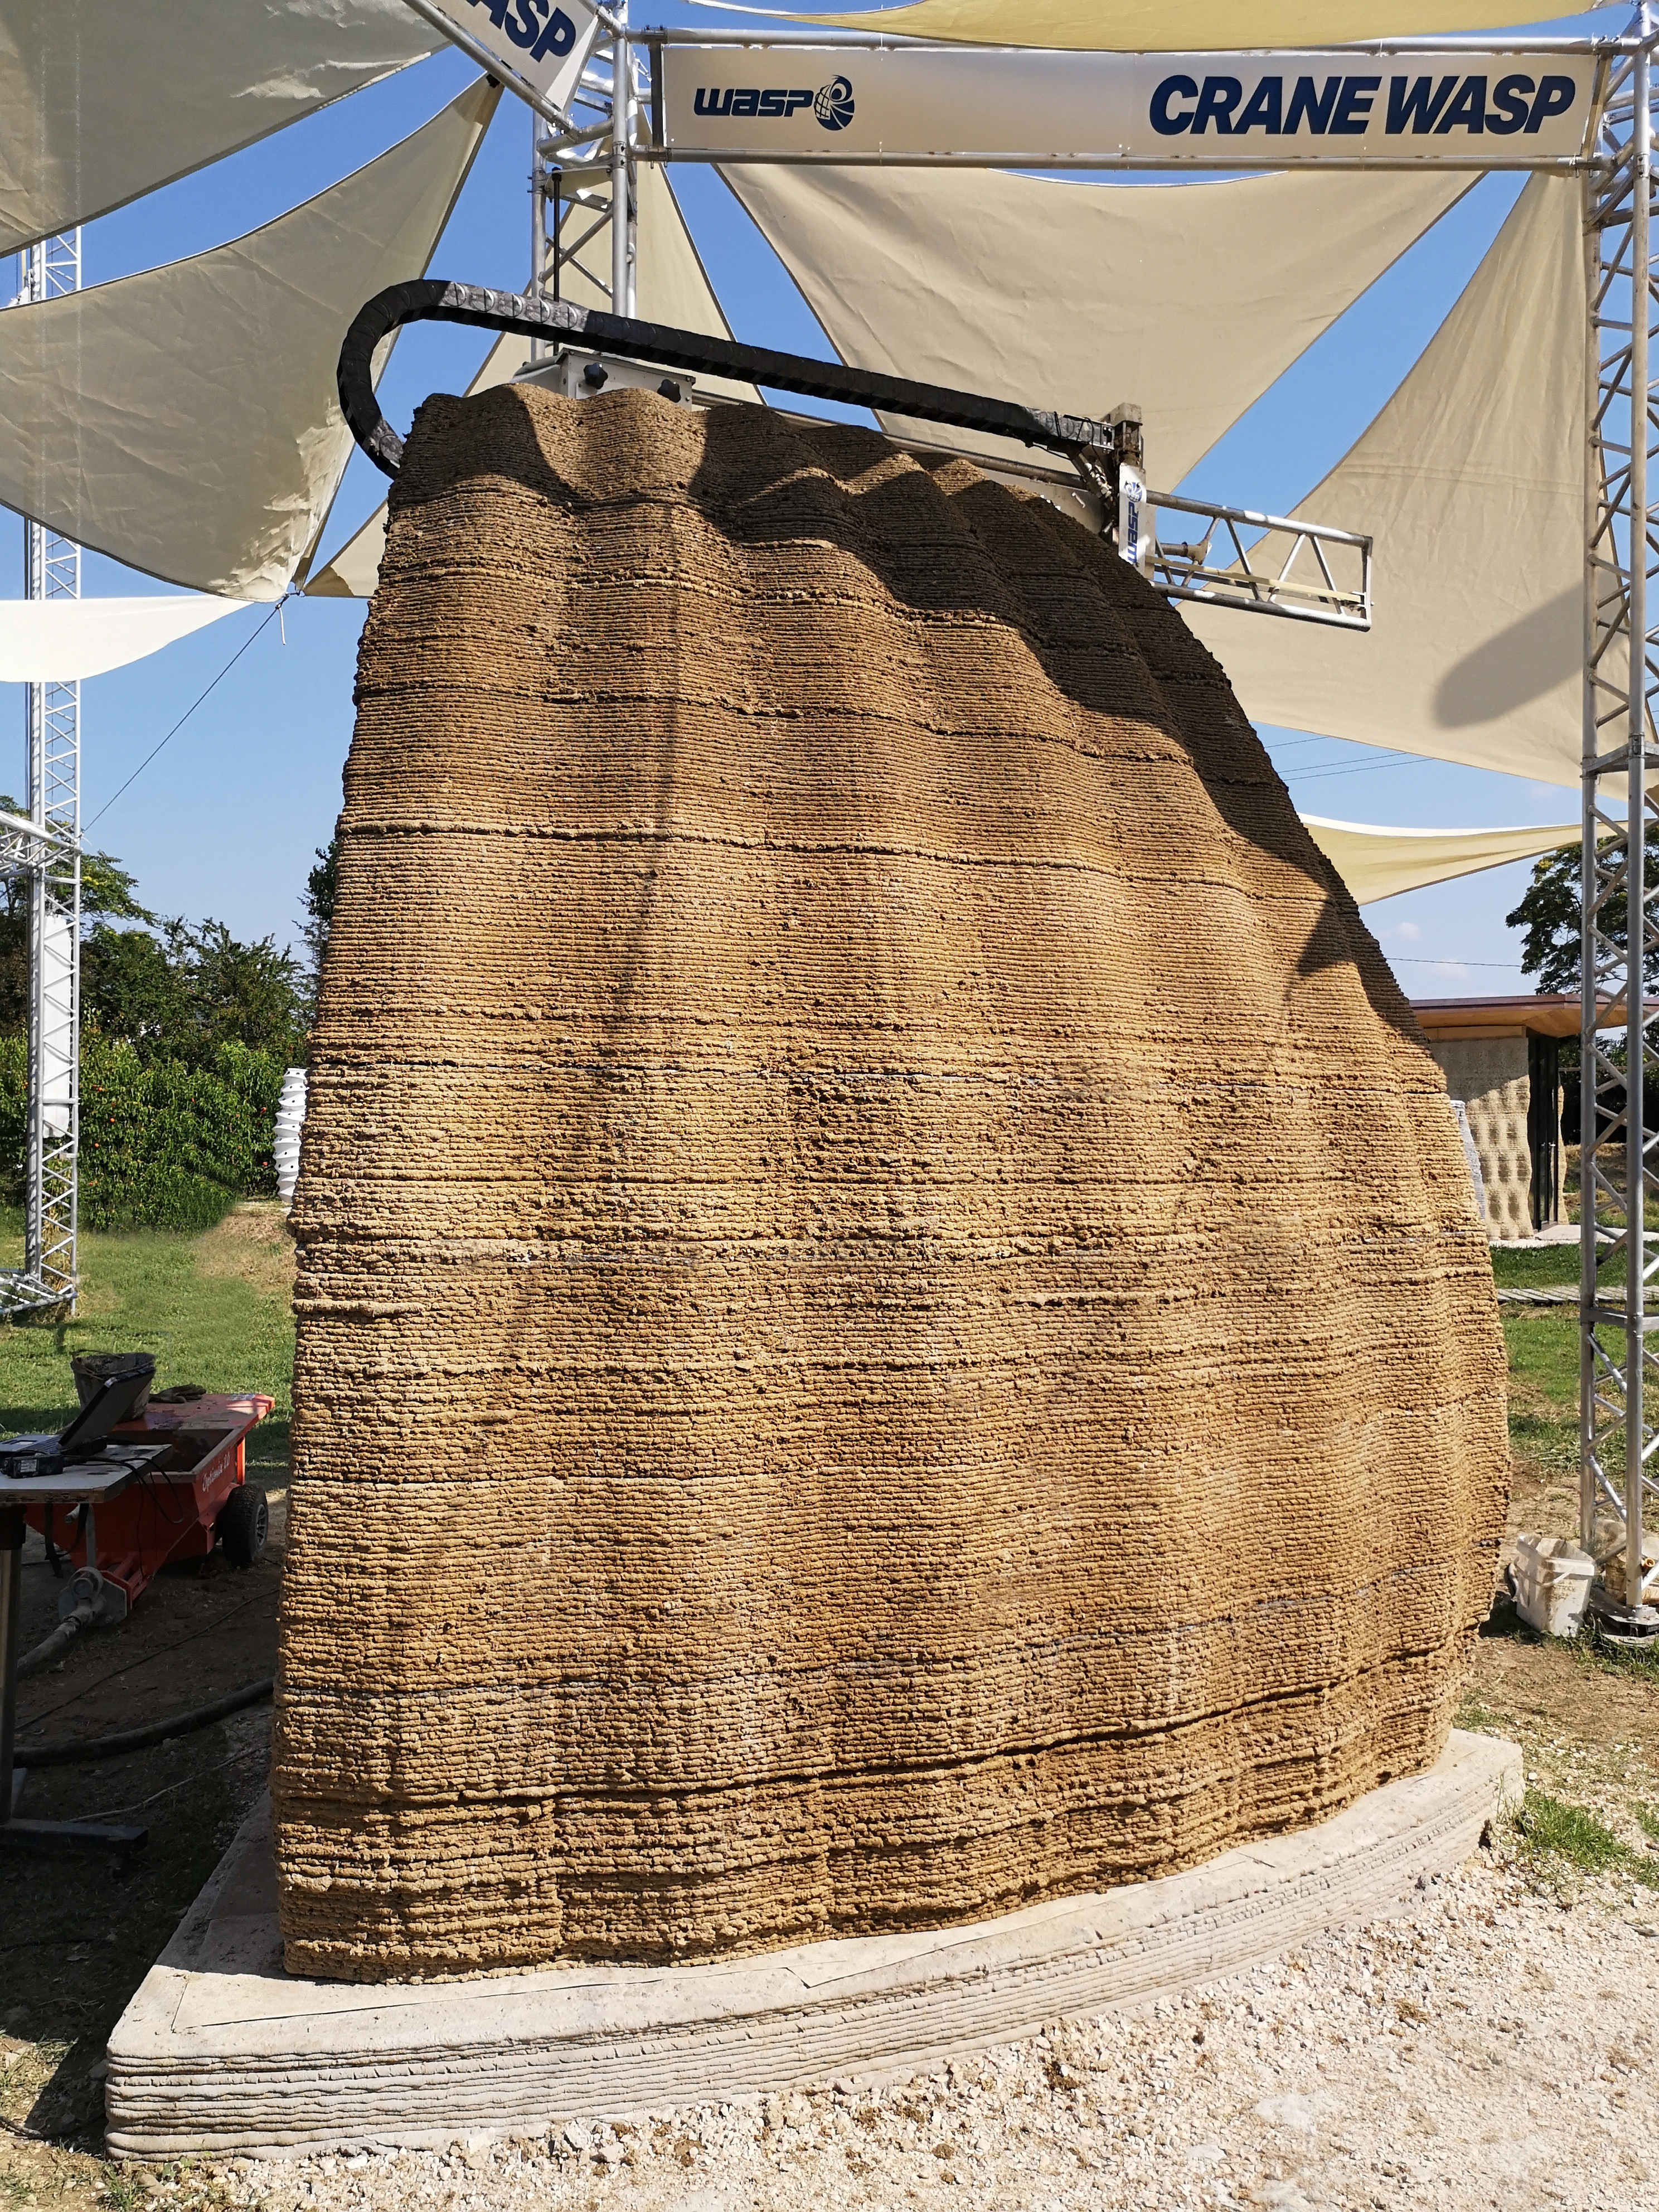 3D printed earth wall section of the TECLA house. Photo via WASP.